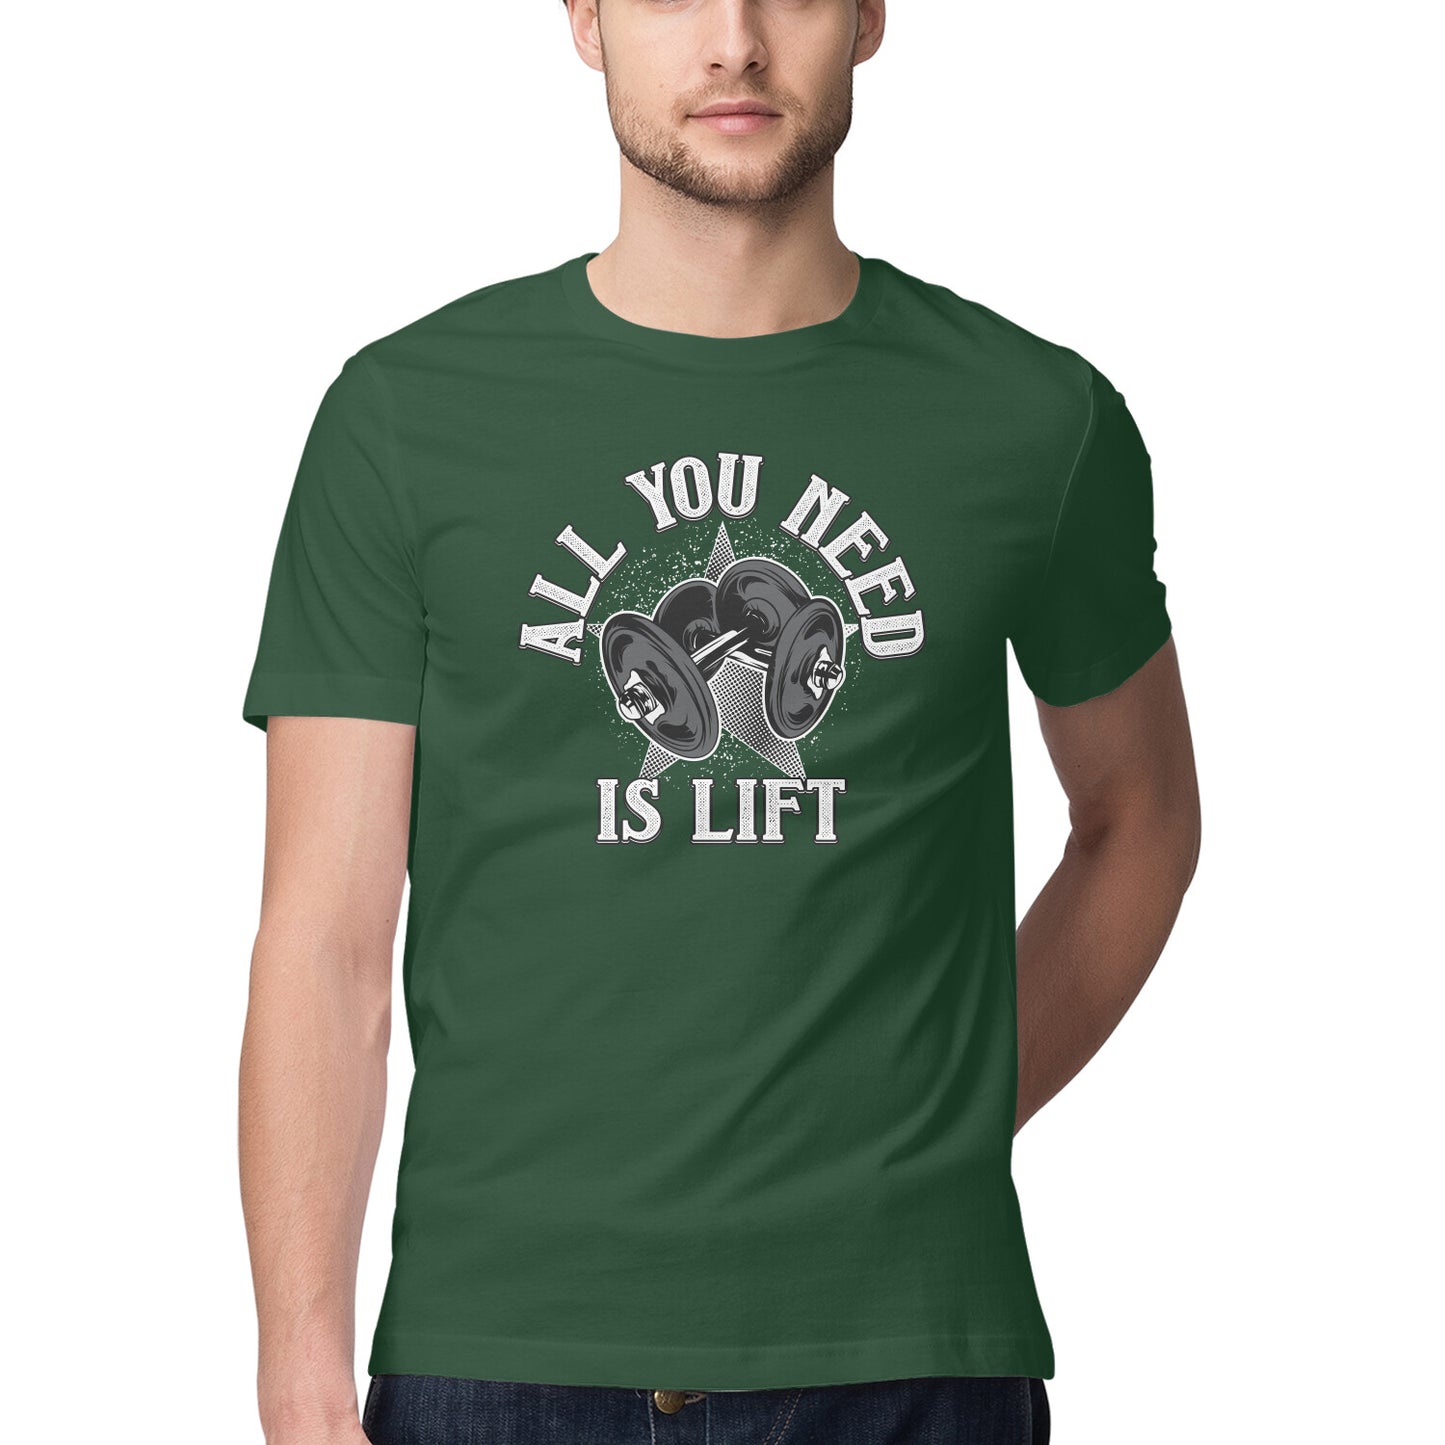 All you need is lift GYM Motivation Printed T-Shirt